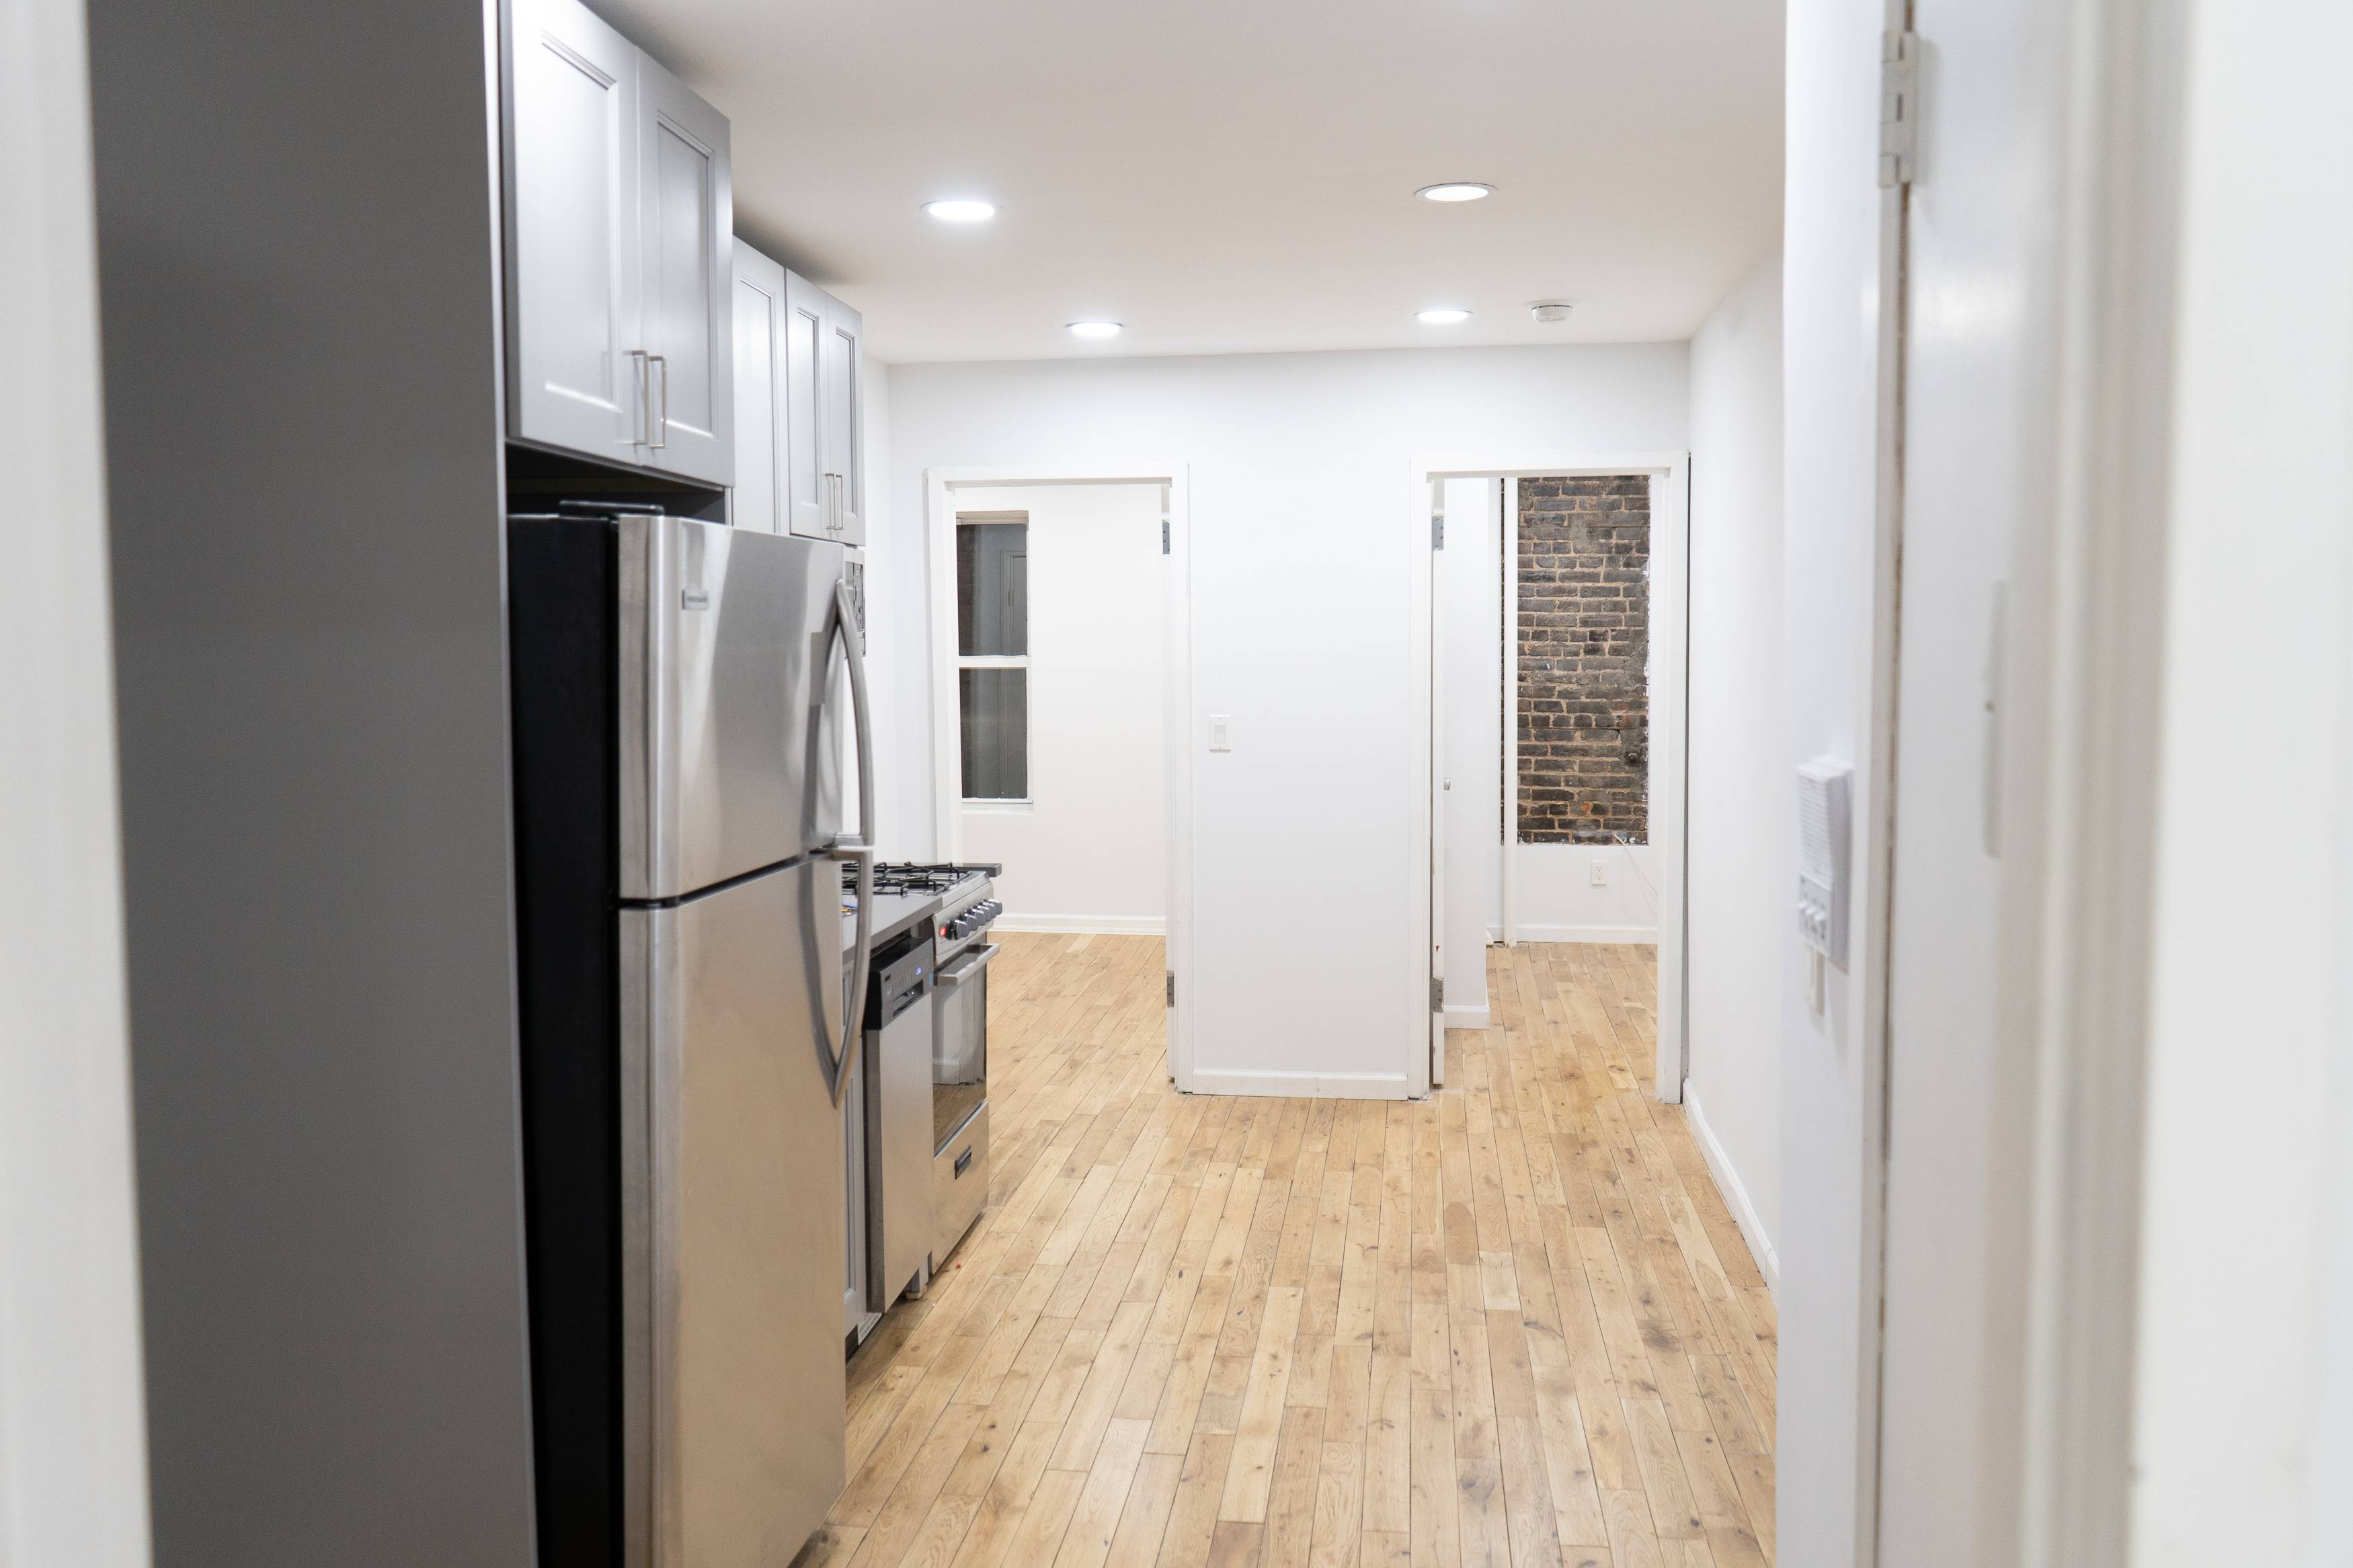 Mulberry Street facing true 4 bedroom 2 bathroom apartment in prime Little Italy.